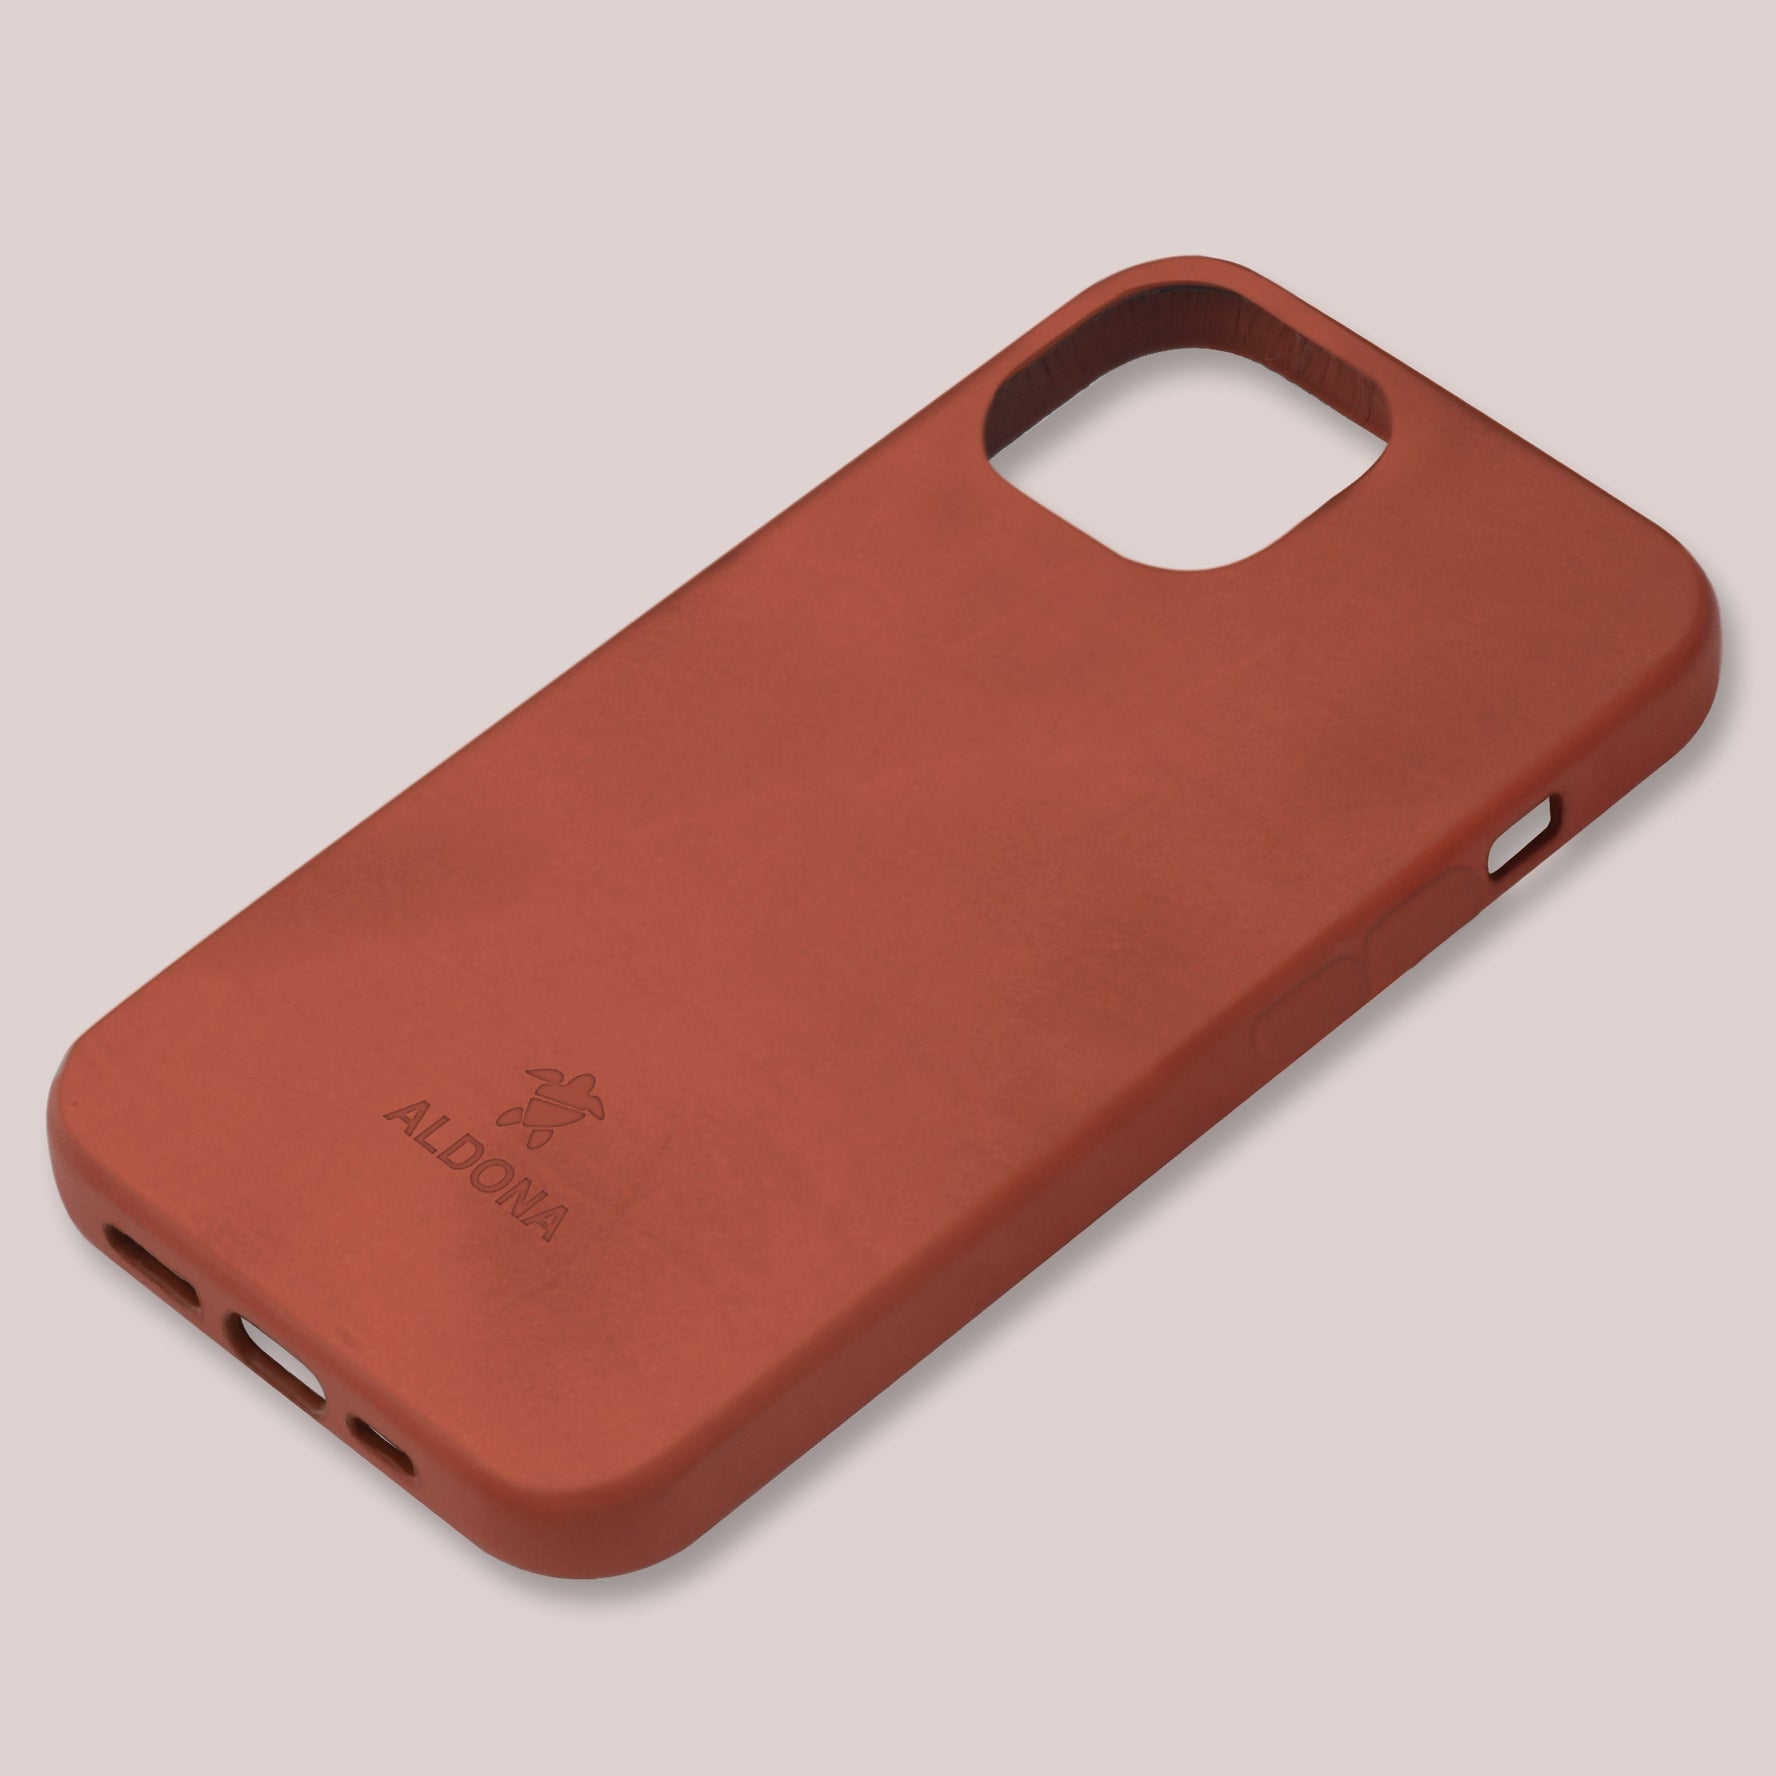 Kalon Case for iPhone 14 Pro Max with MagSafe Compatibility - Cognac